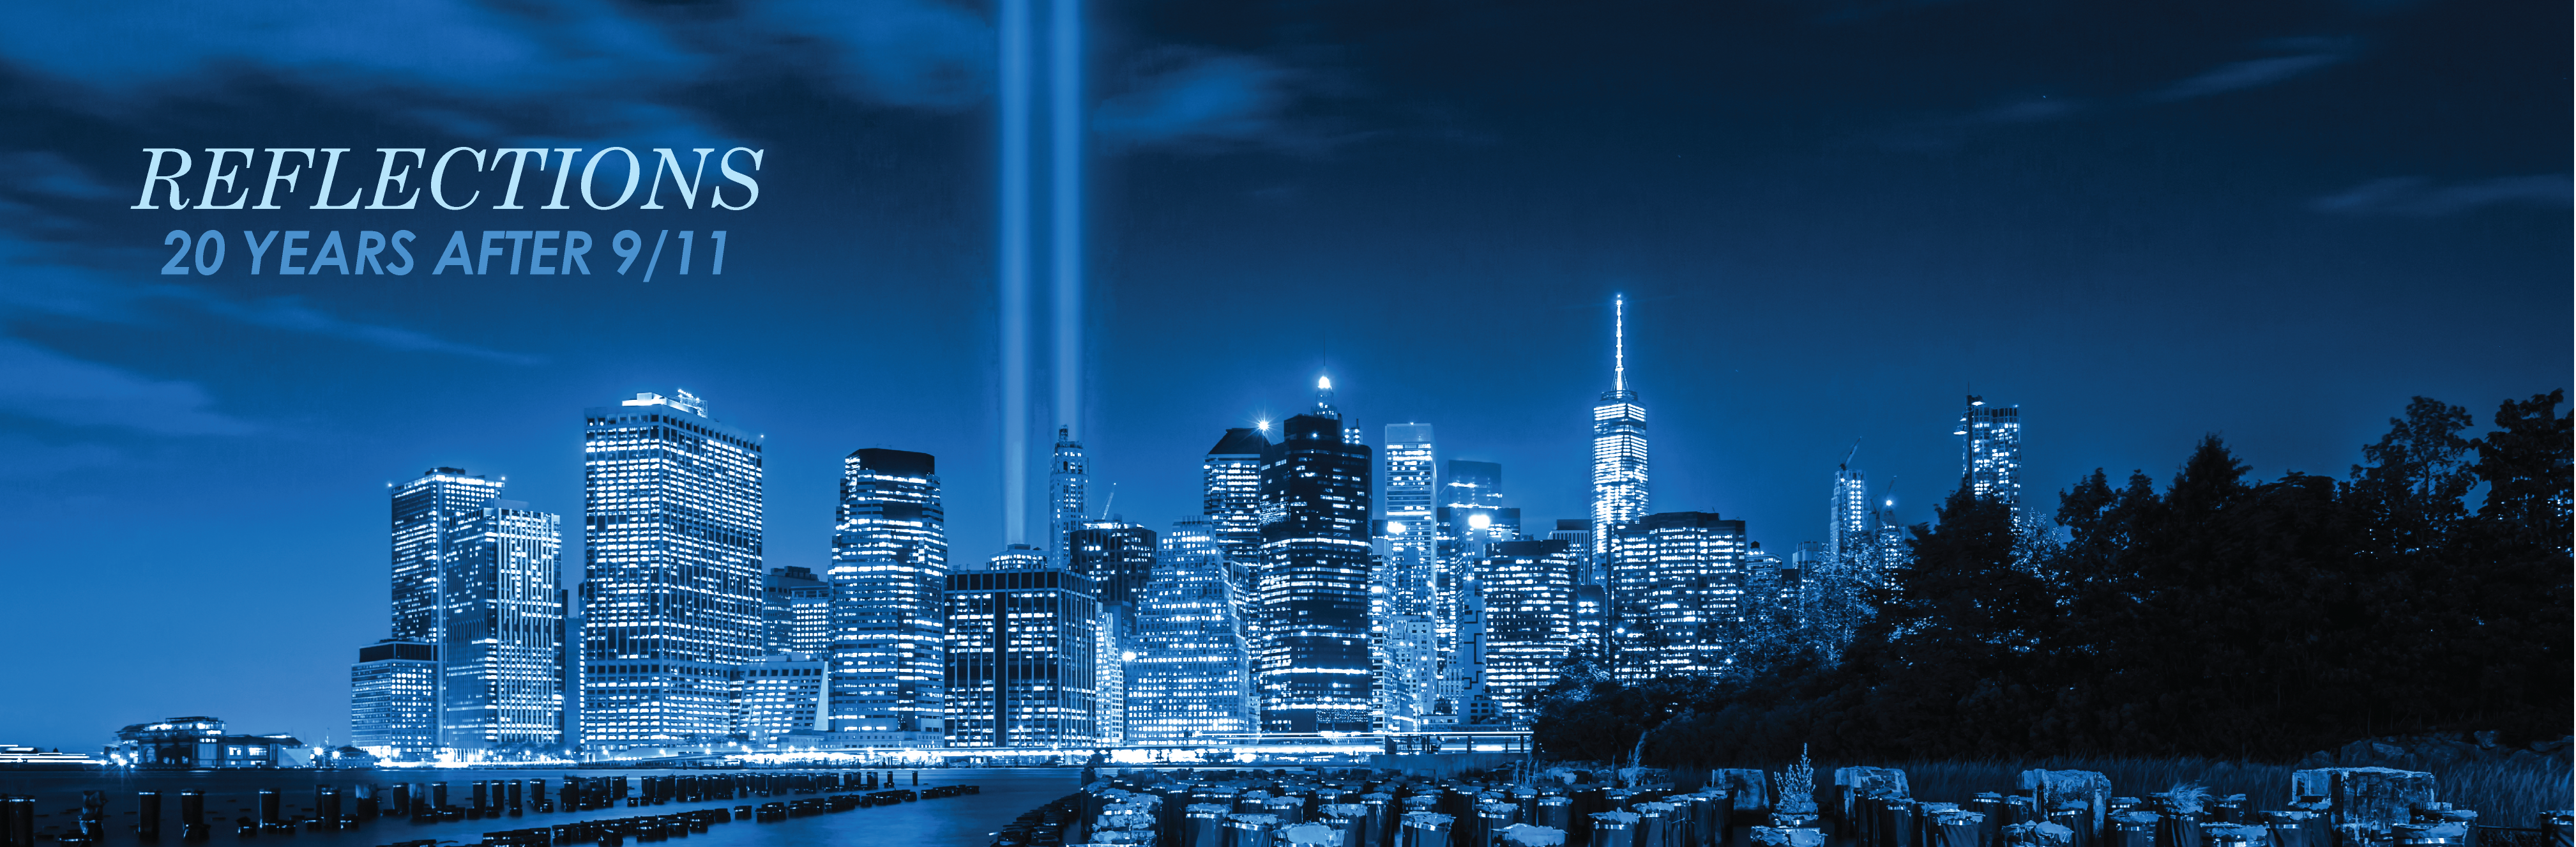 Reflections 20 Years After 9/11